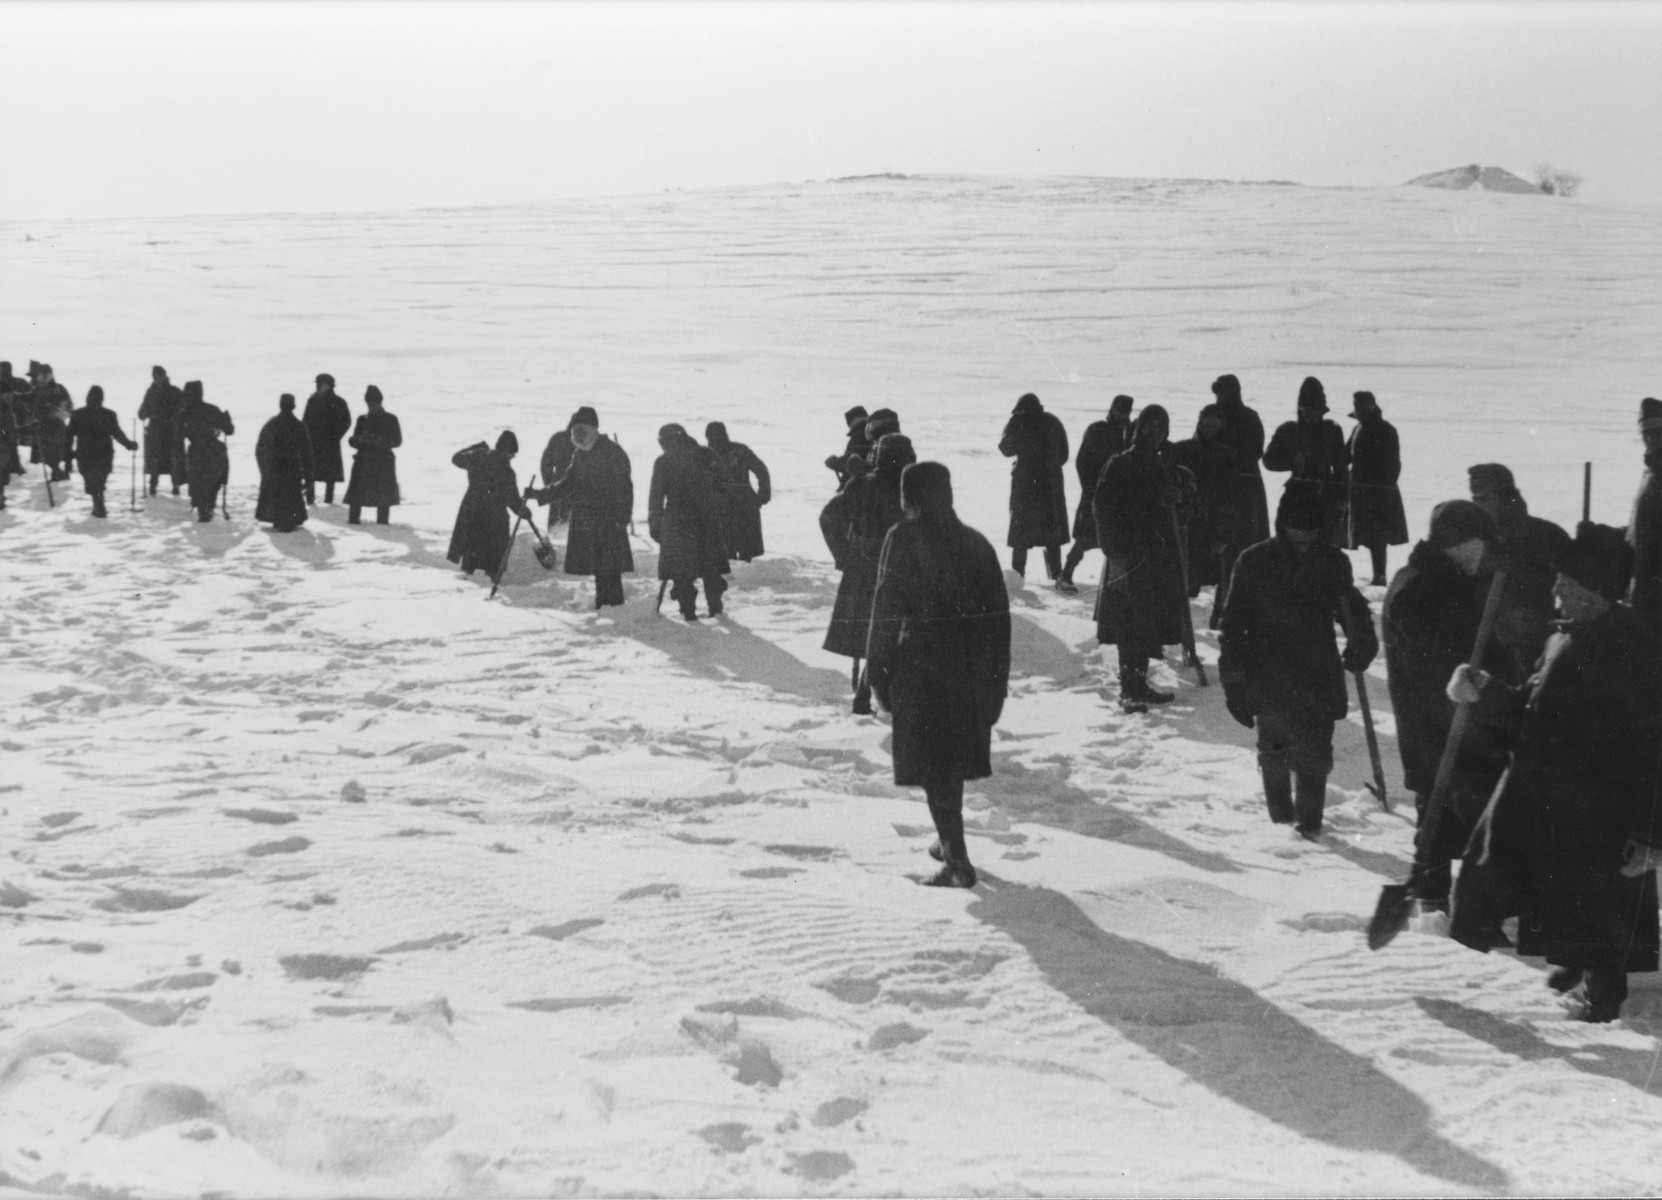 Jewish conscripts in Company 108/57 of the Hungarian Labor Service at forced labor clearing snow from a road.